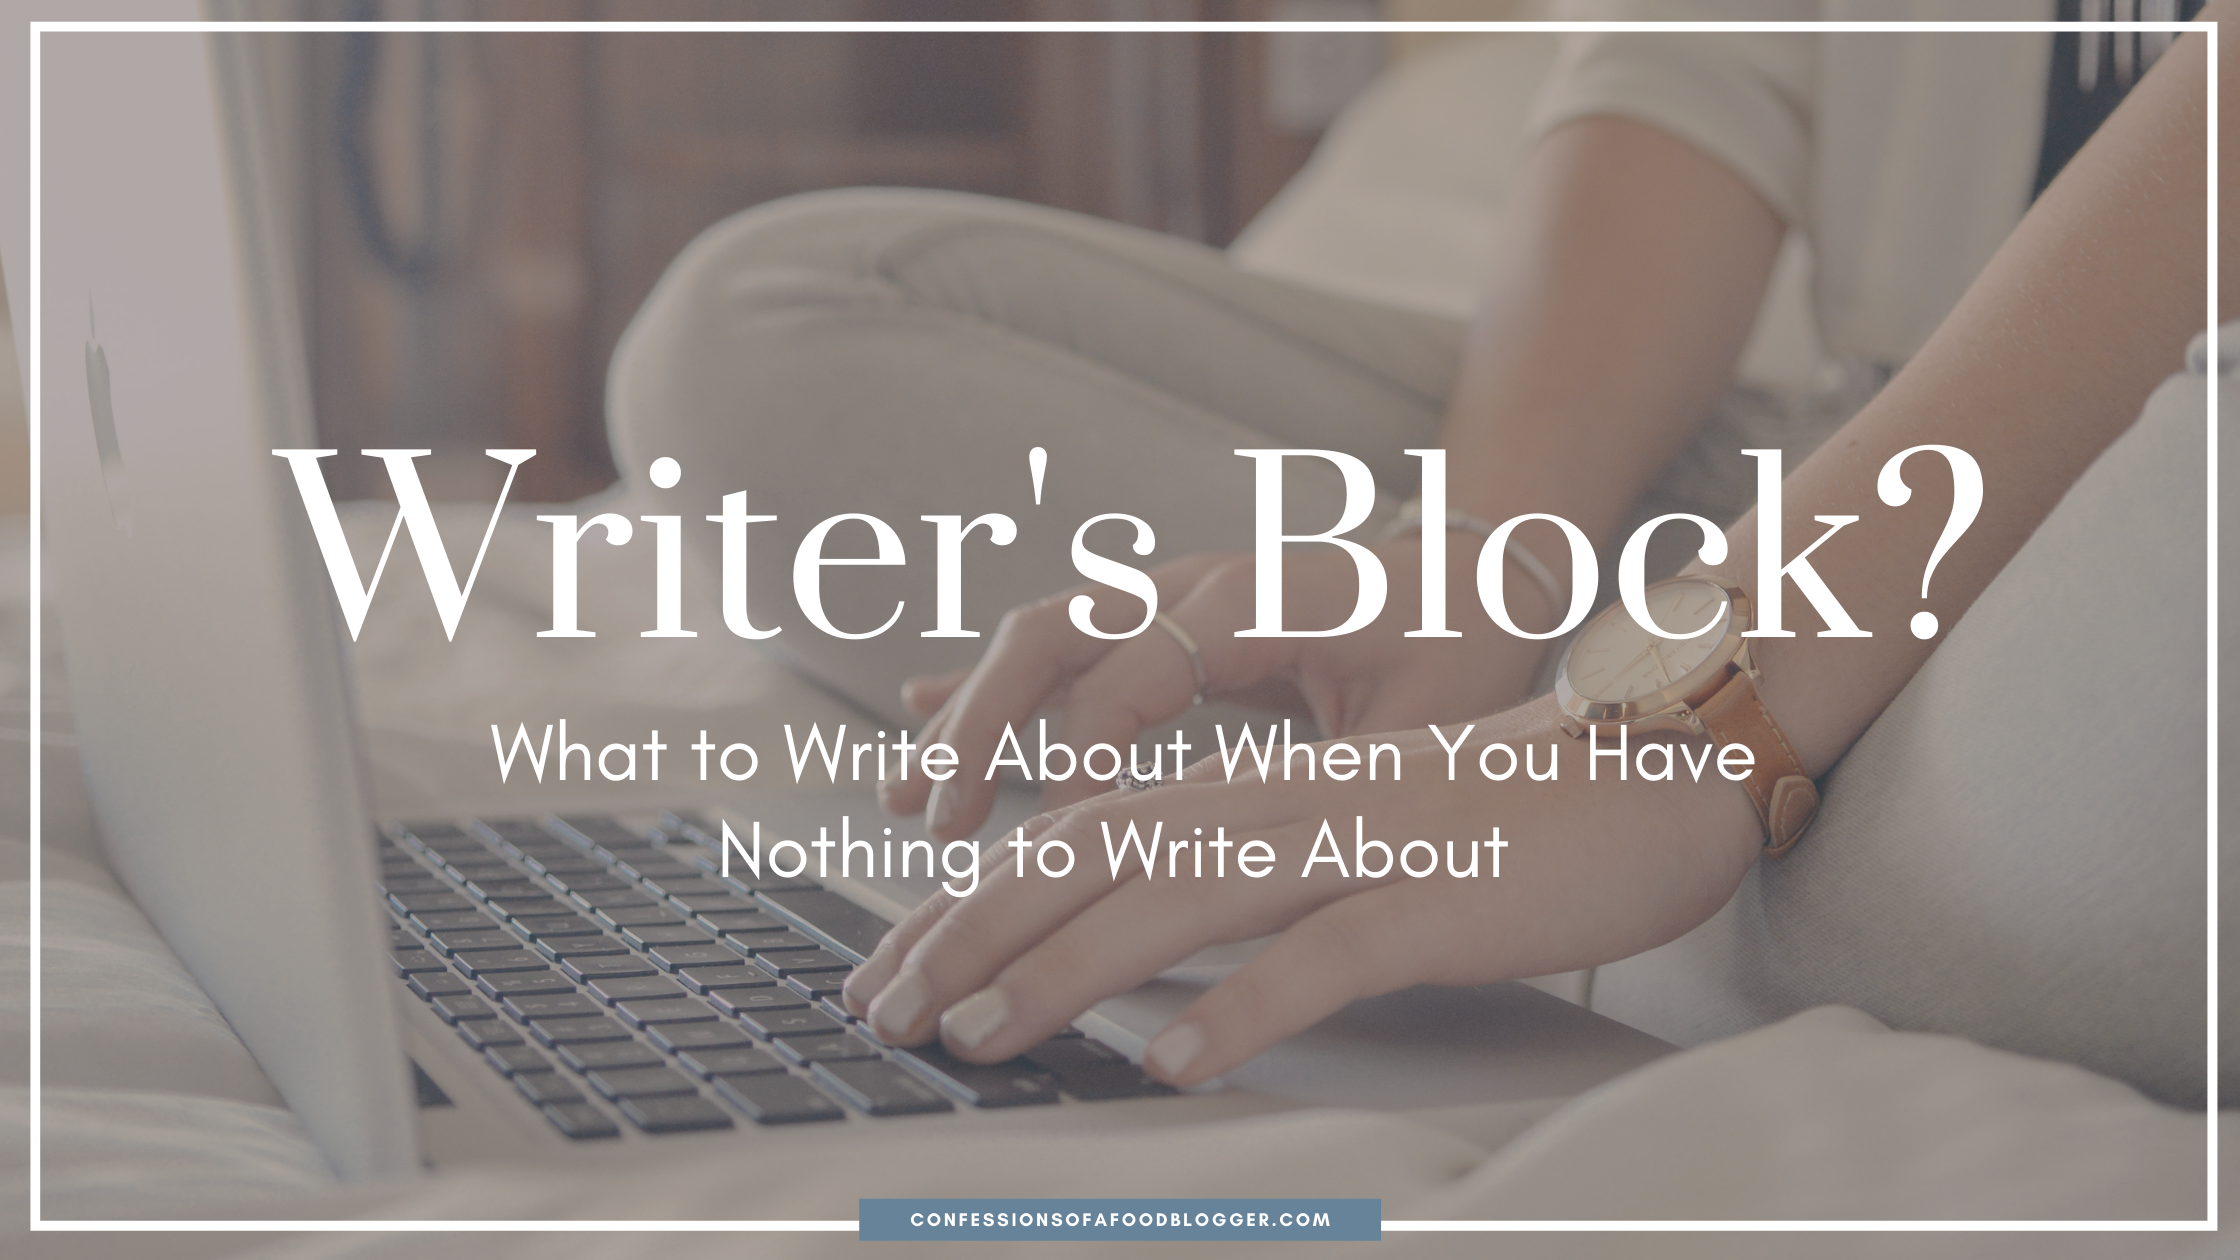 Blog Post Ideas That Double as the Writer’s Block Cure